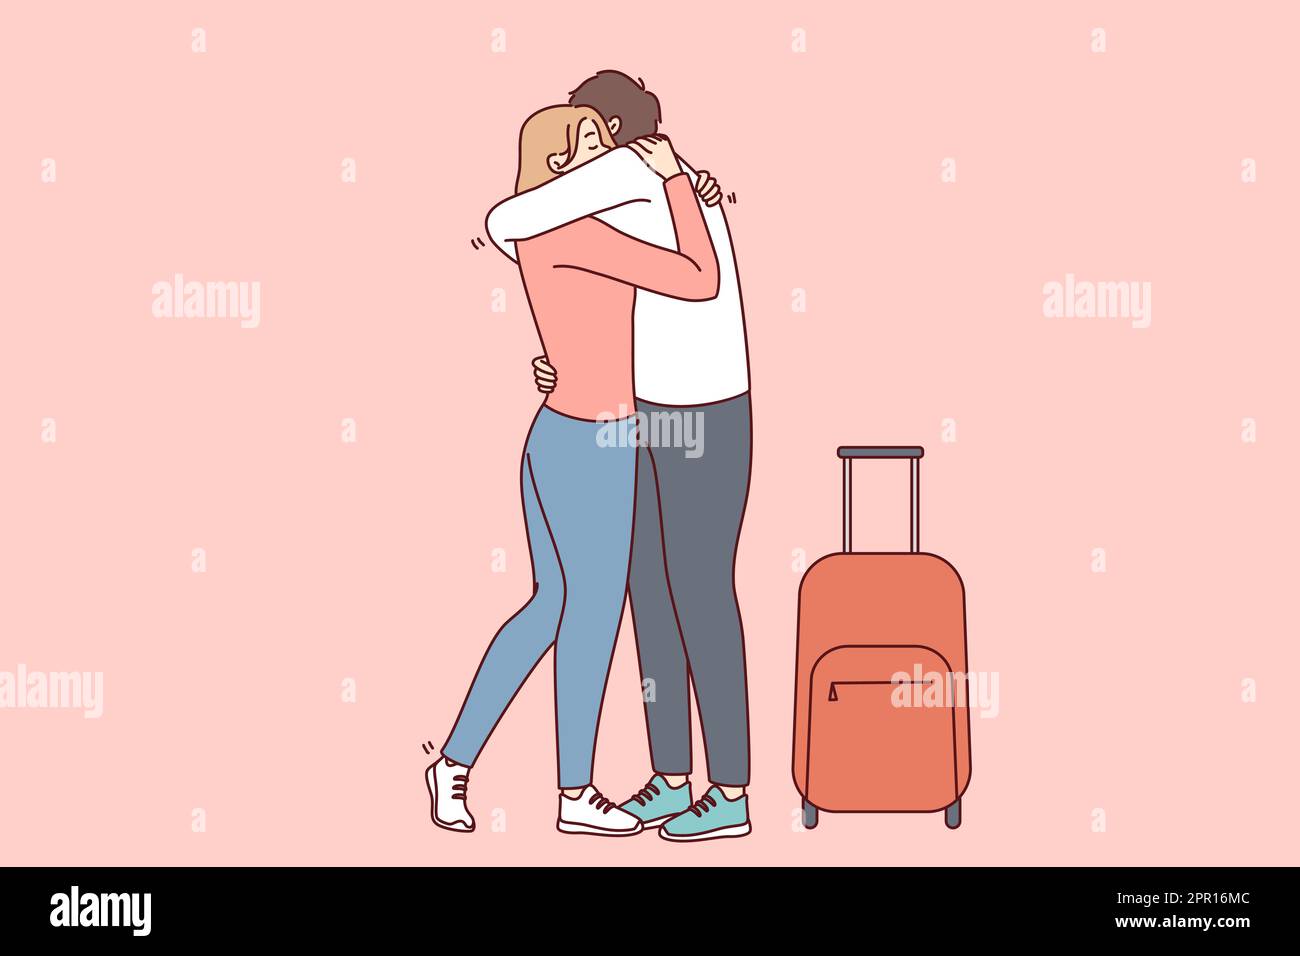 Woman hugging man with suitcase Stock Vector